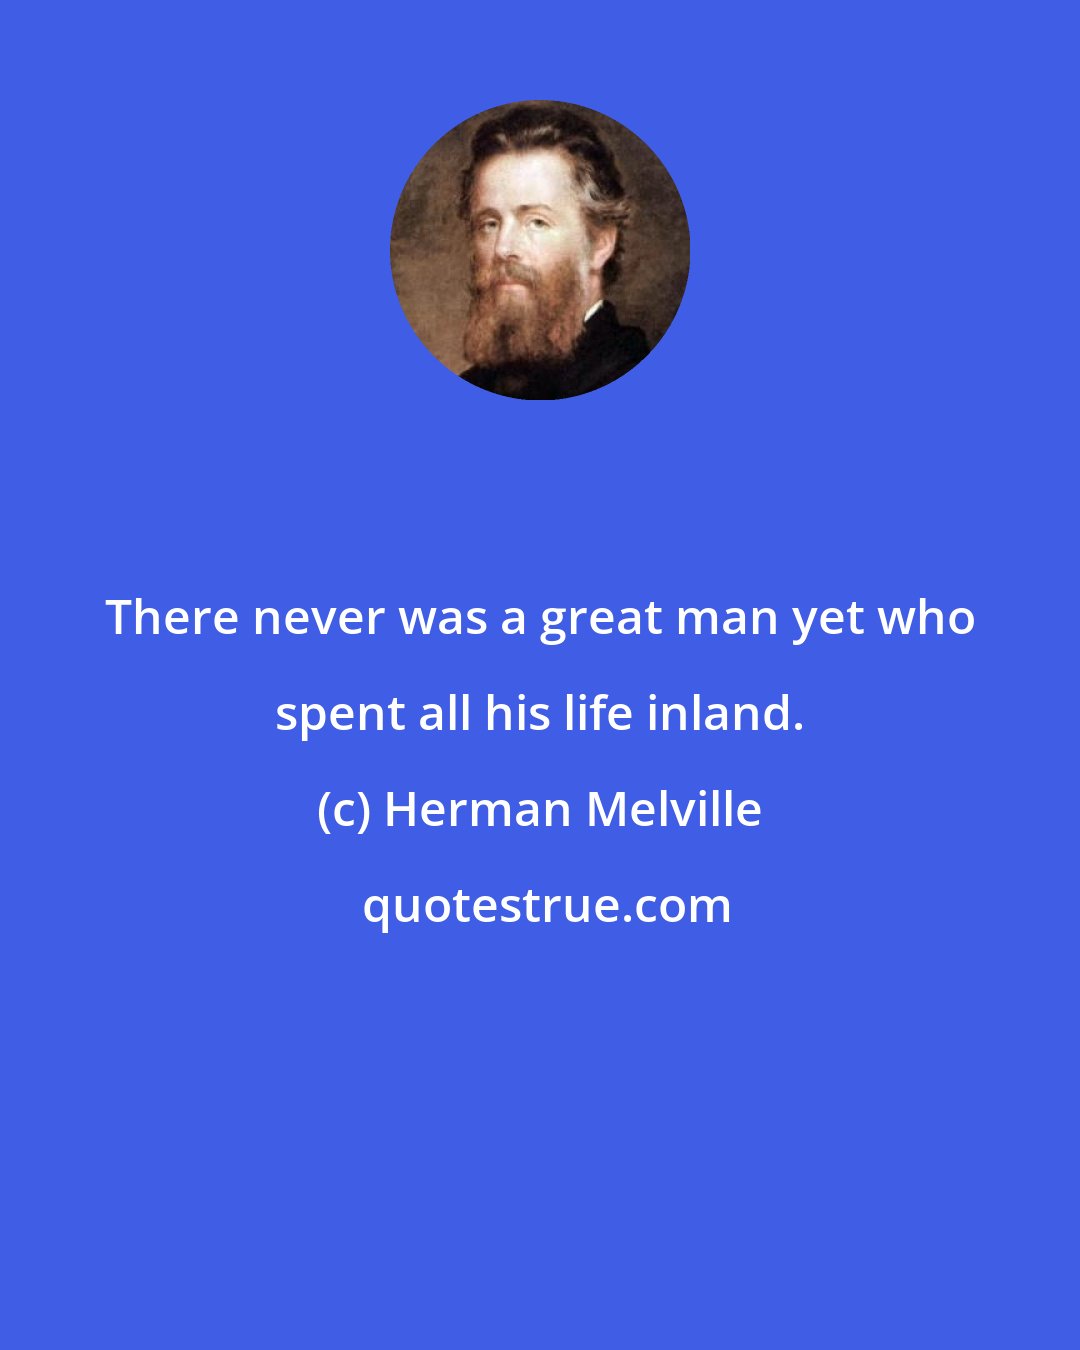 Herman Melville: There never was a great man yet who spent all his life inland.